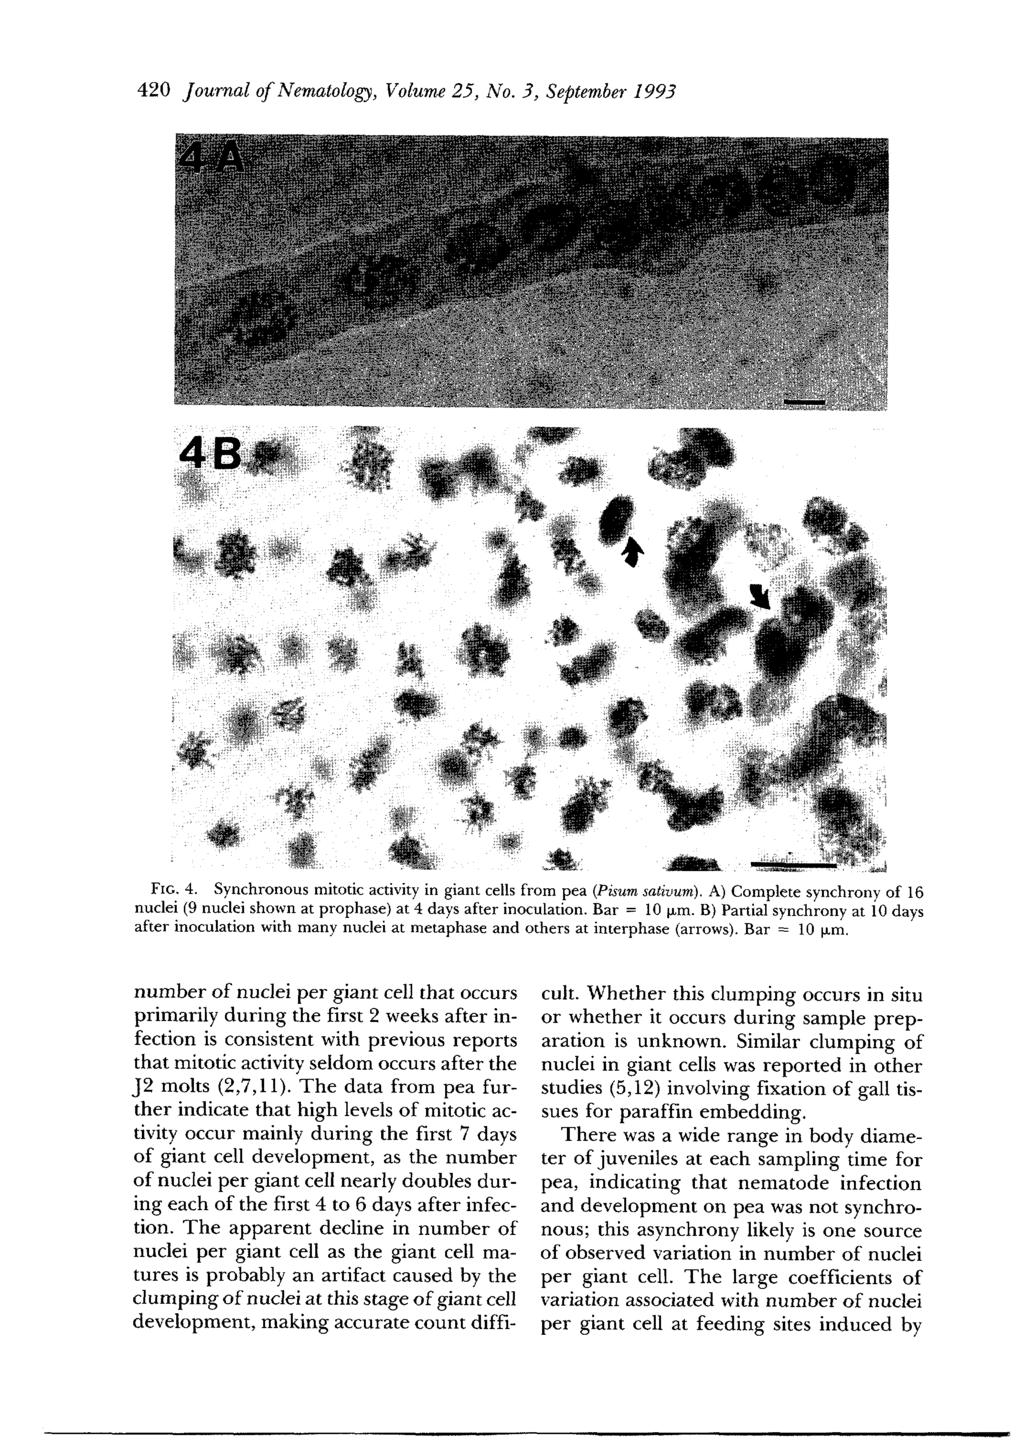 420 Journal of Nematology, Volume 25, No. 3, September 1993 j FIo. 4. Synchronous mitotic activity in giant cells from pea (Pisum sativum).